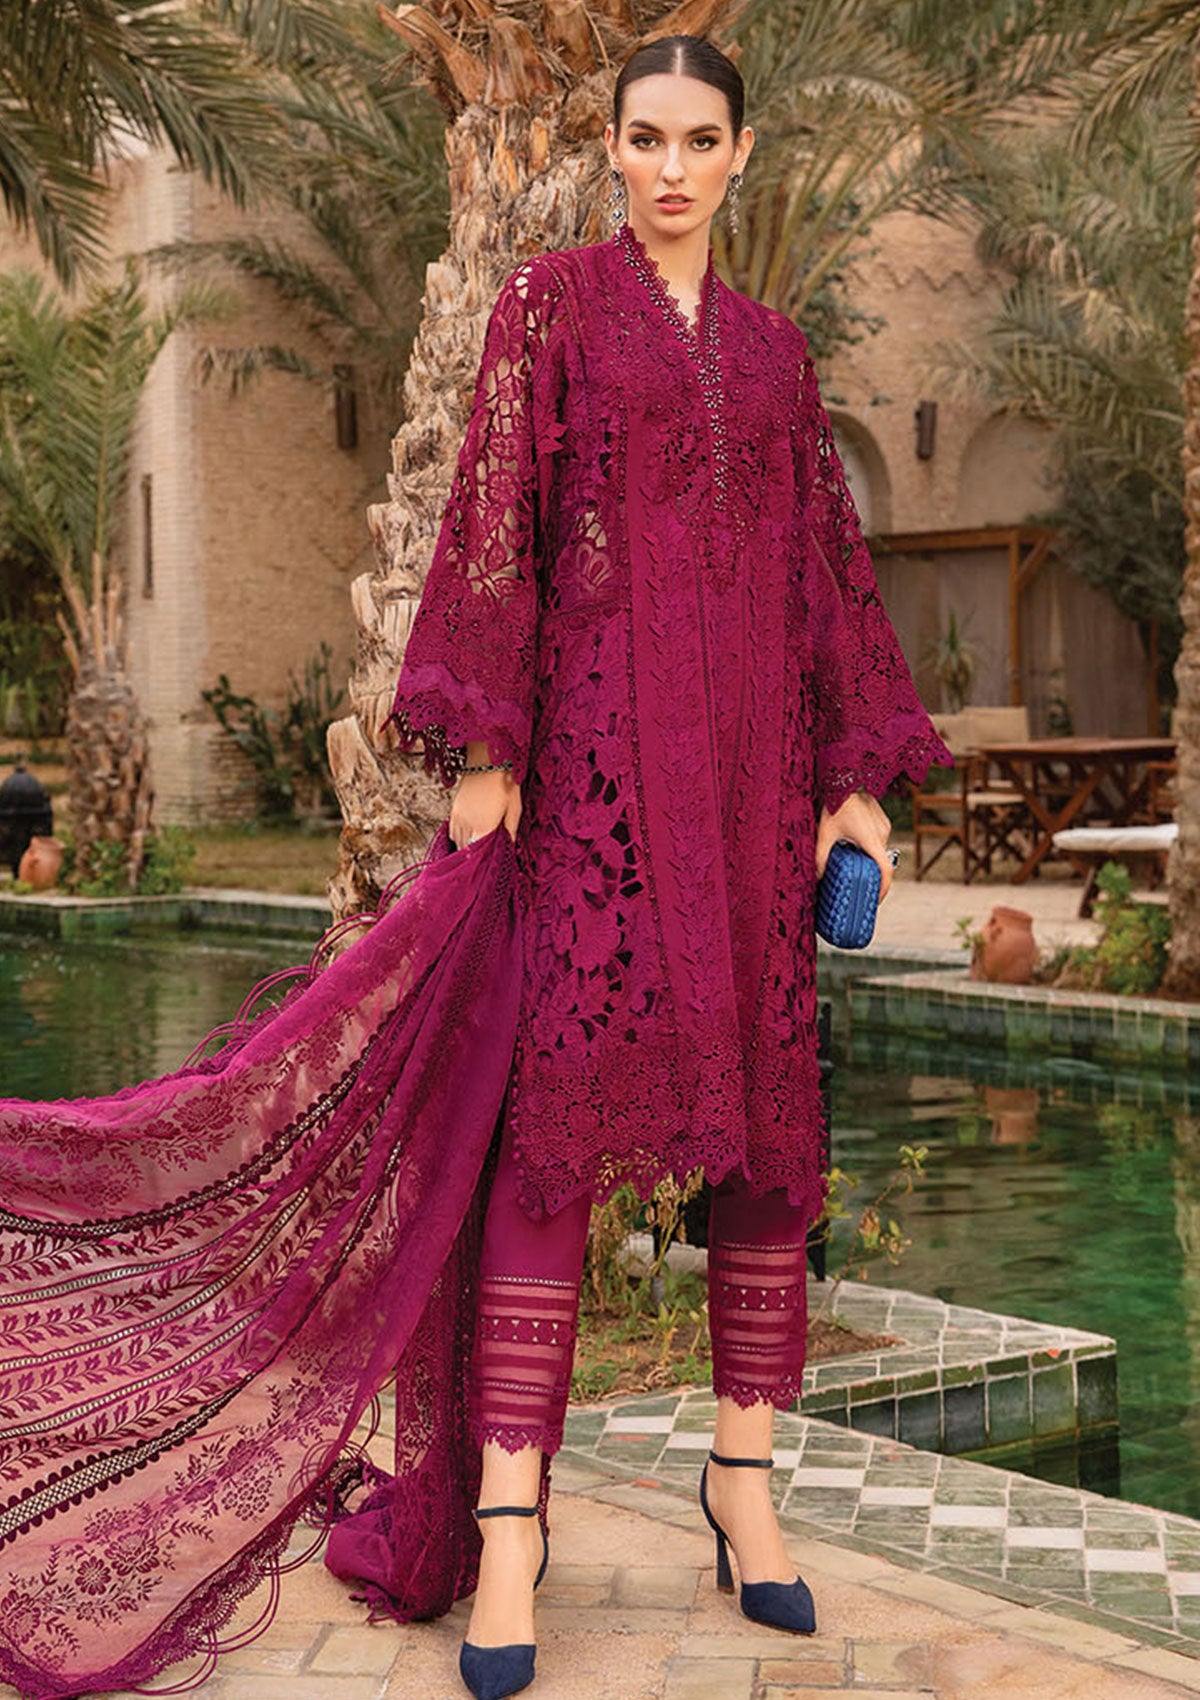 Lawn Collection - Maria B - Voyage a'Luxe - Luxury - MB24#09B